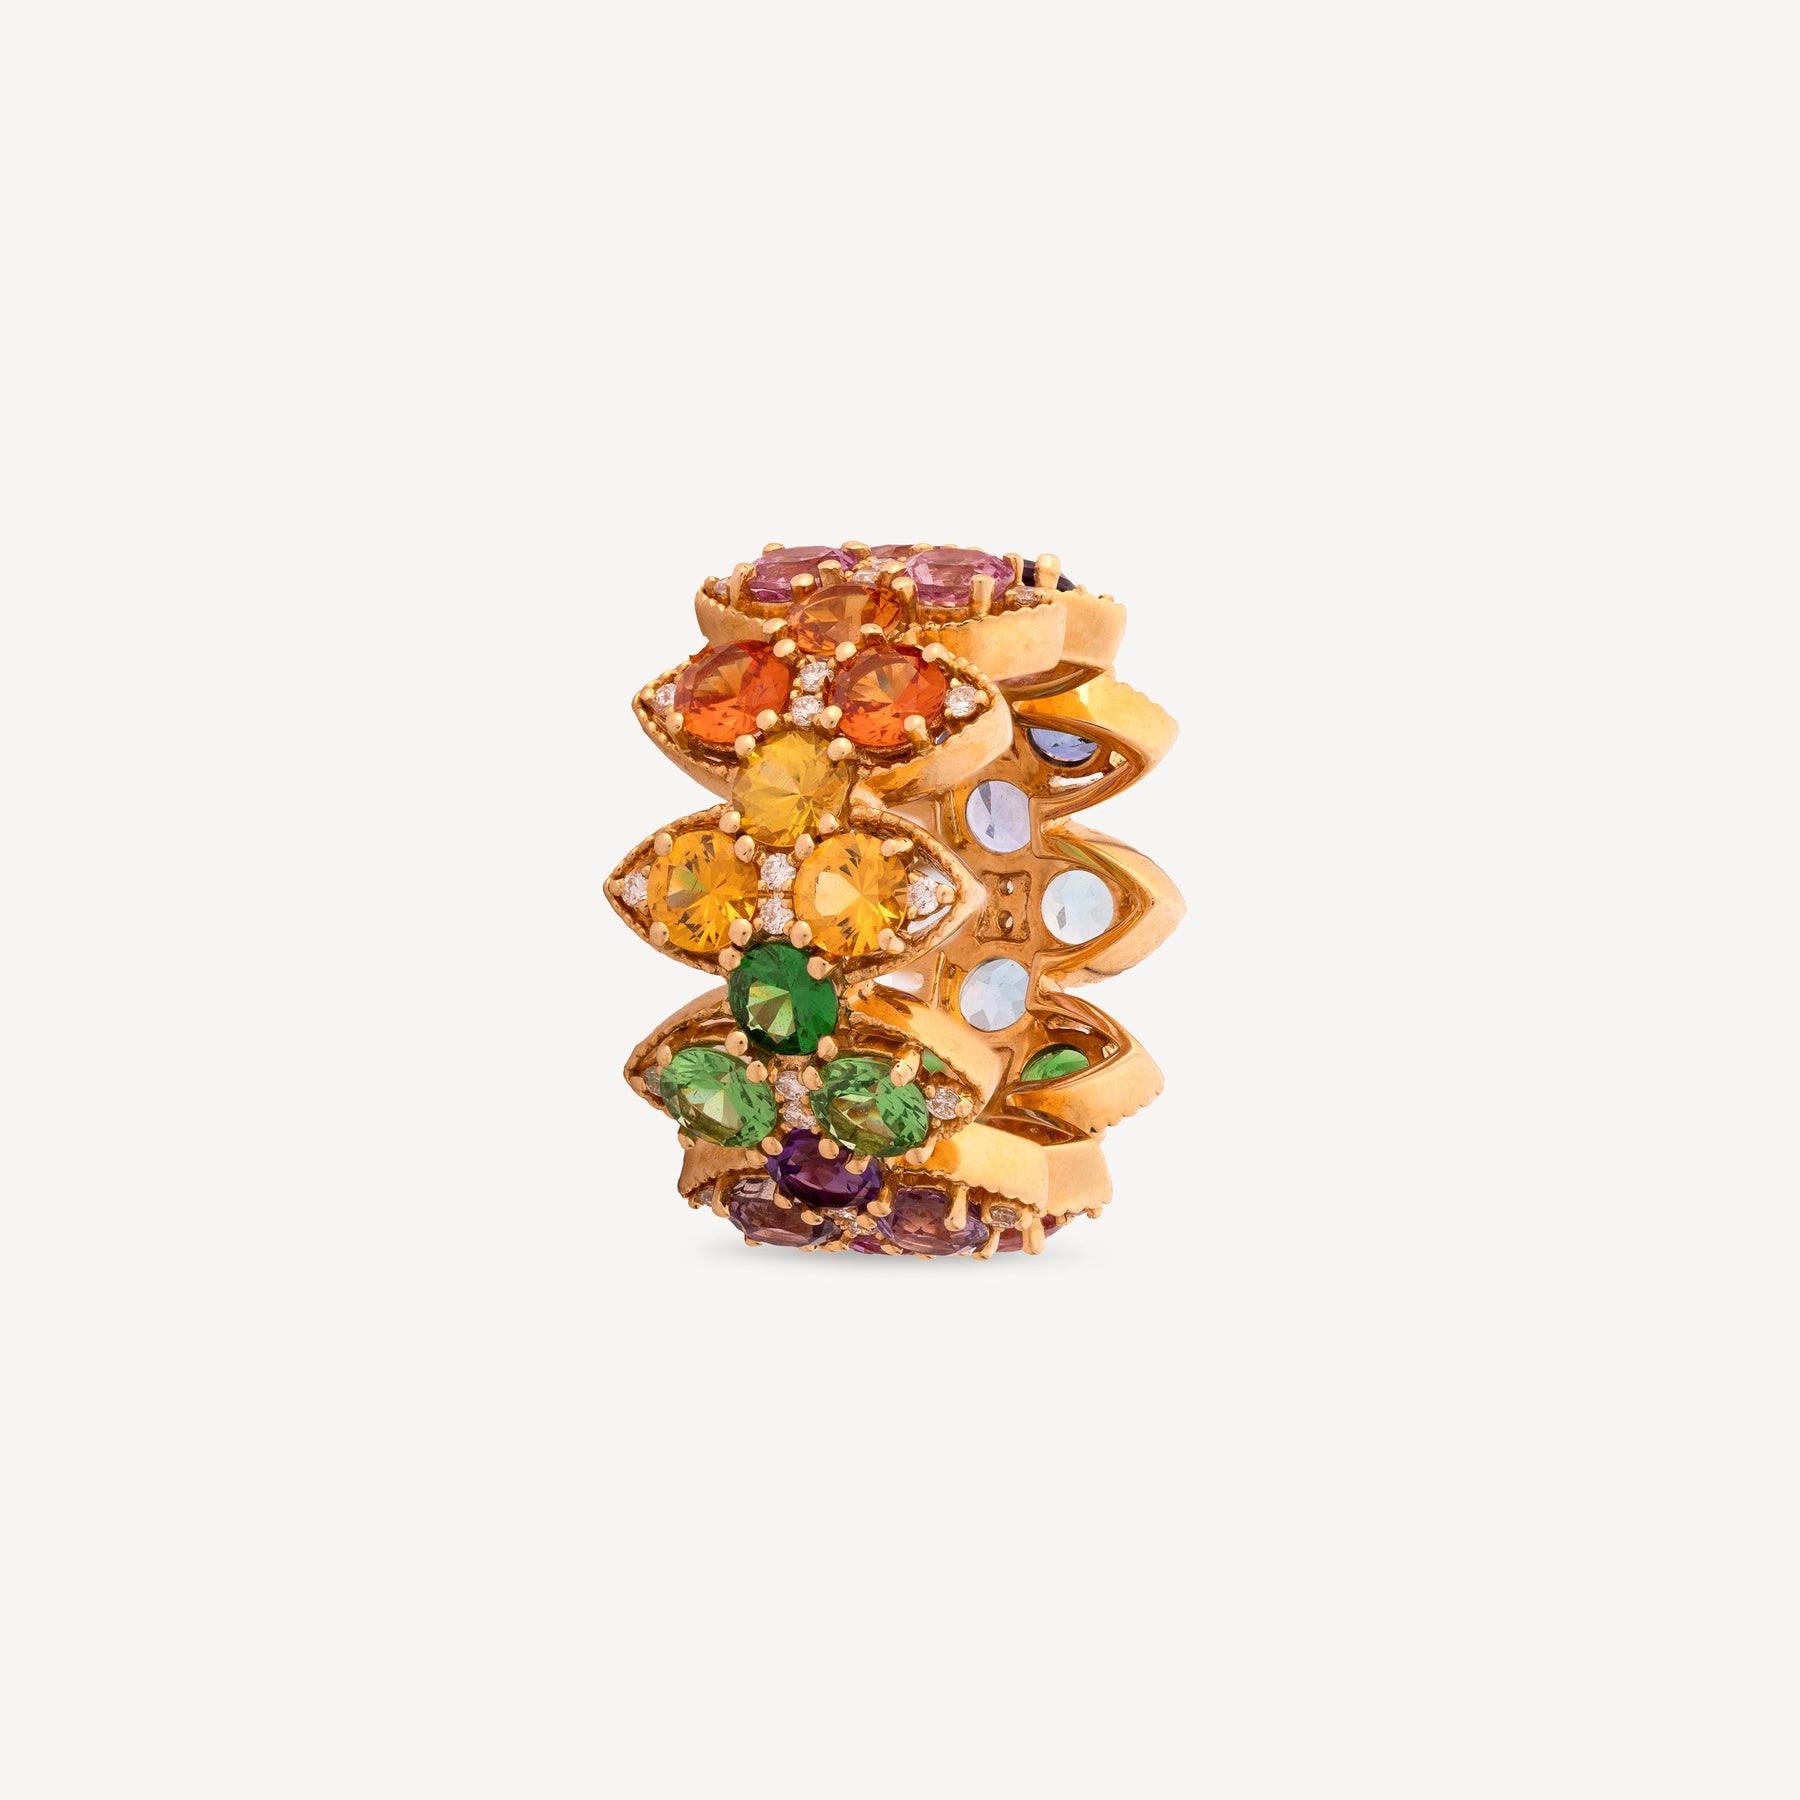 Couronne Ring